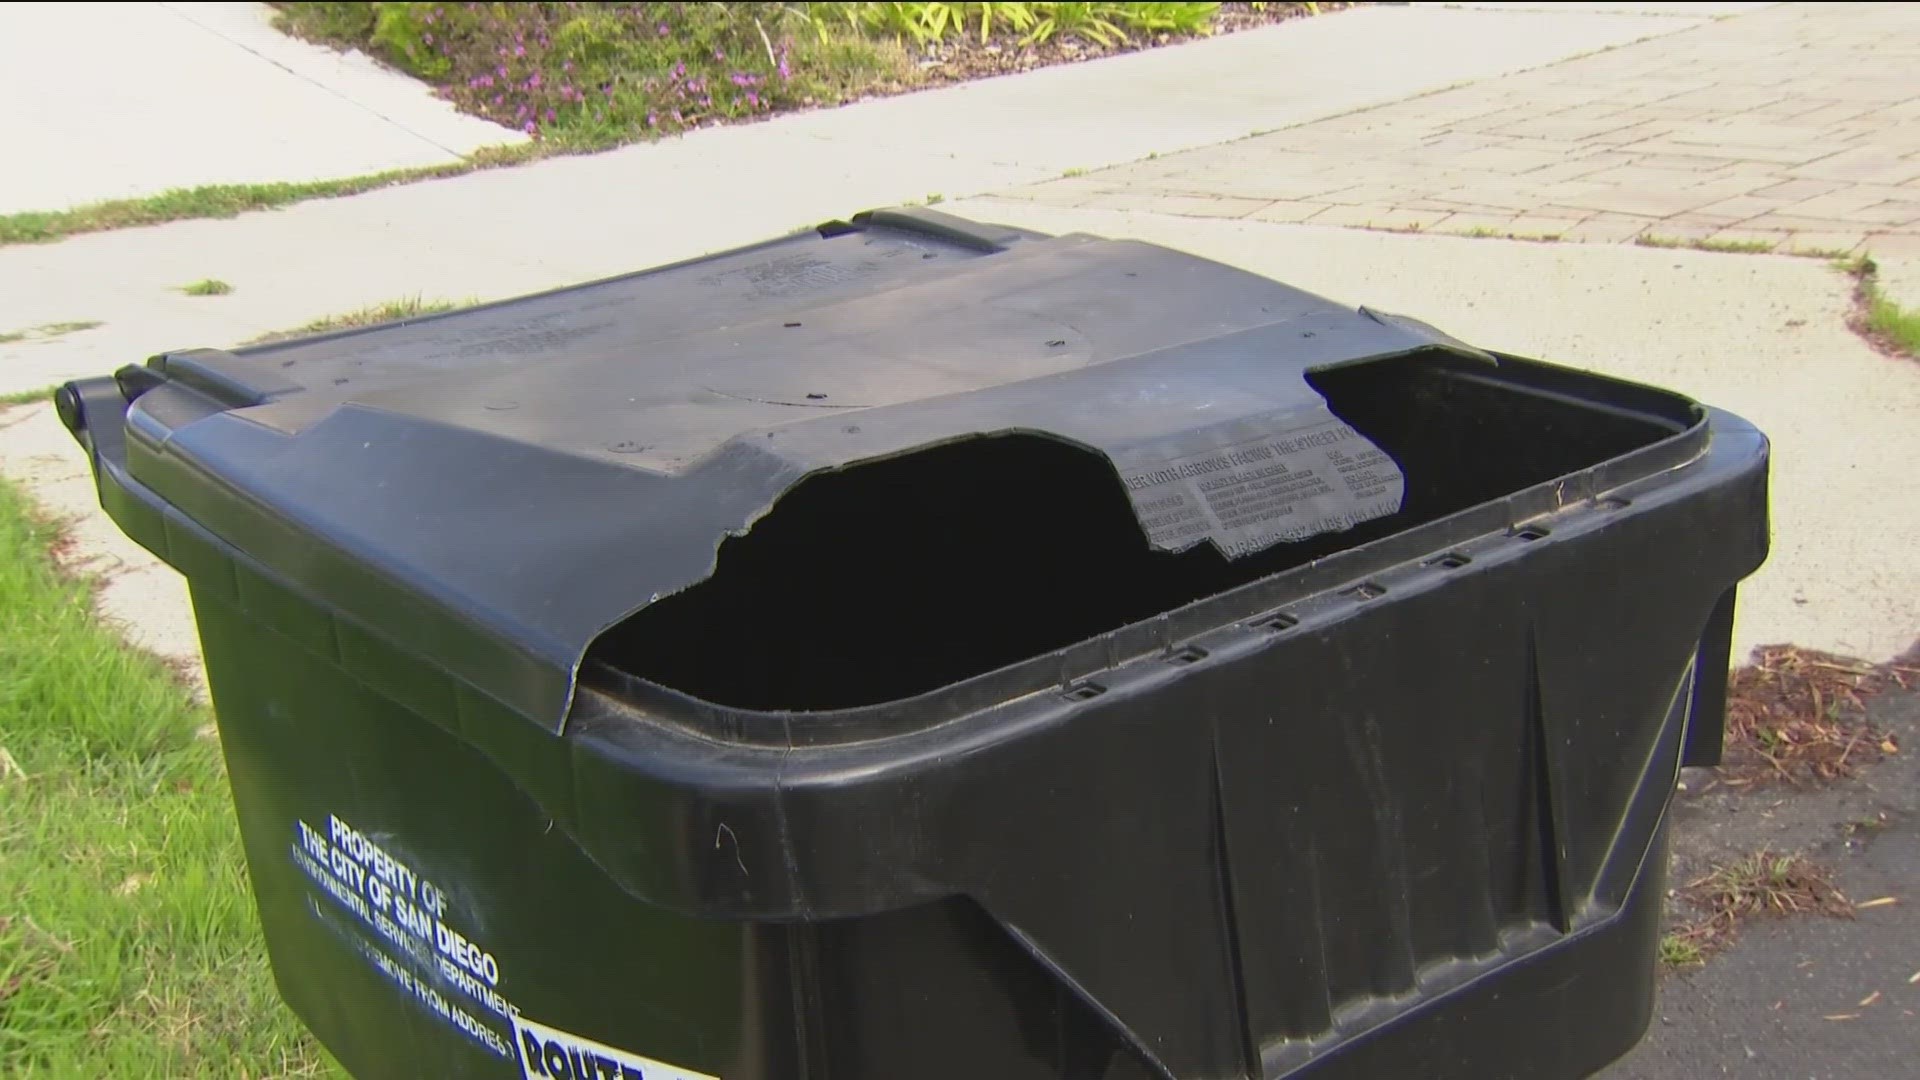 A viewer's video shows a city truck dumping not only his trash, but the entire bin with it before driving off. So who pays then?